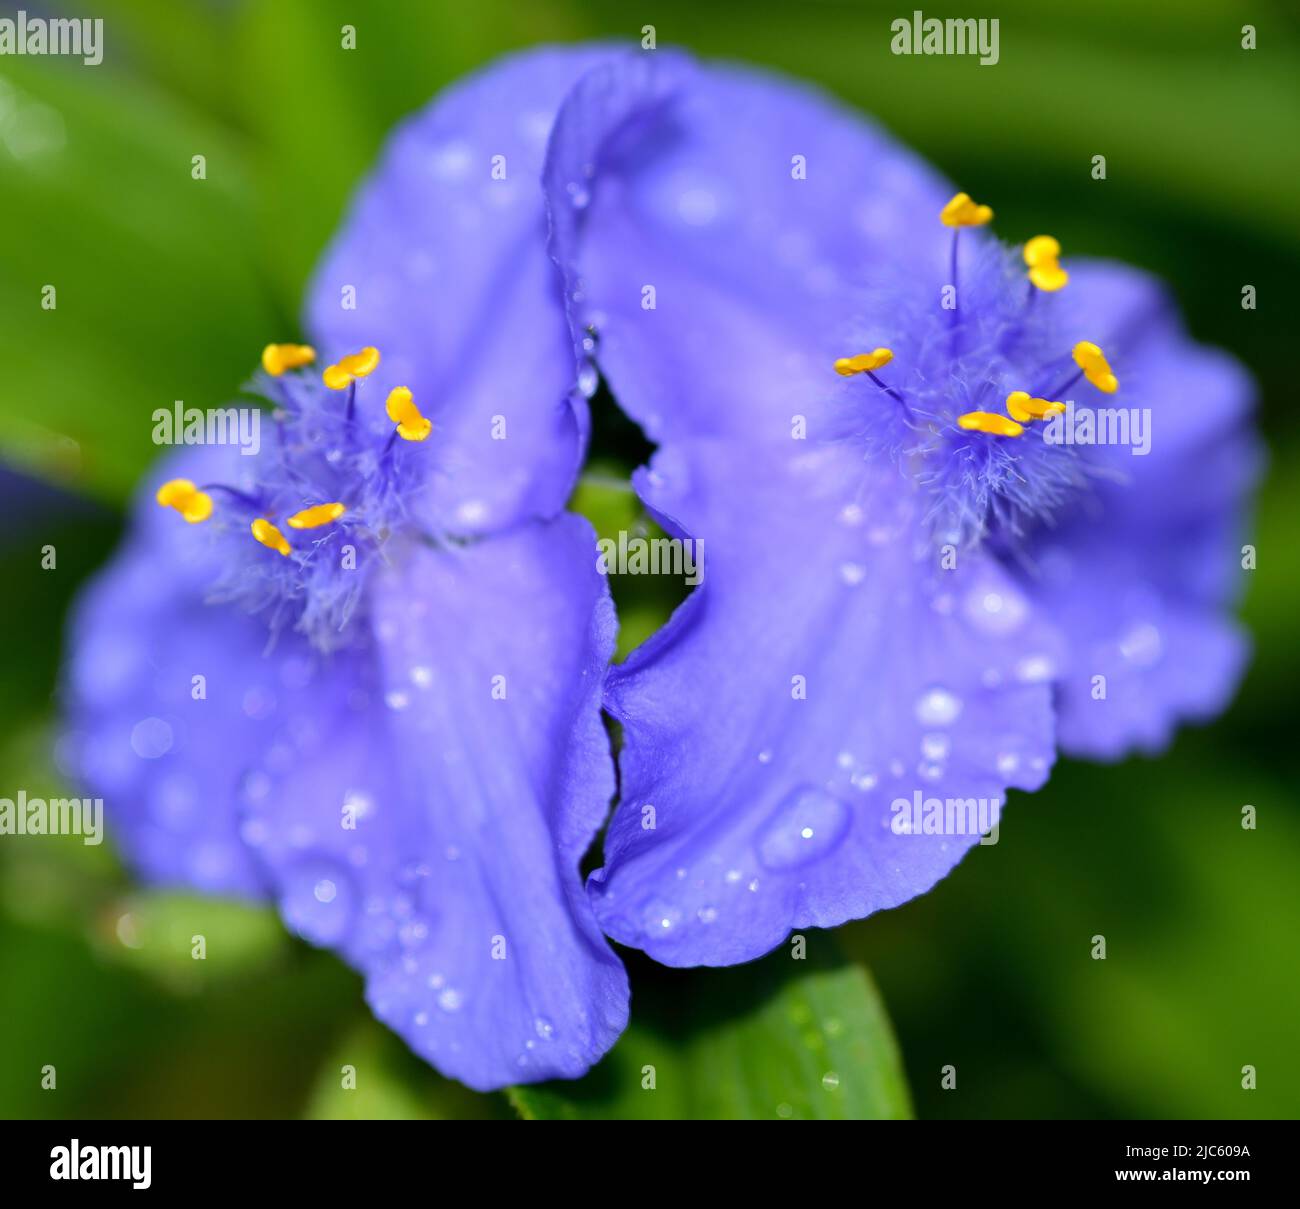 Close up image of blue/purple spiderwort (Tradescantia) blooms taken after a rain shower showing yellow stamens in the center. Stock Photo